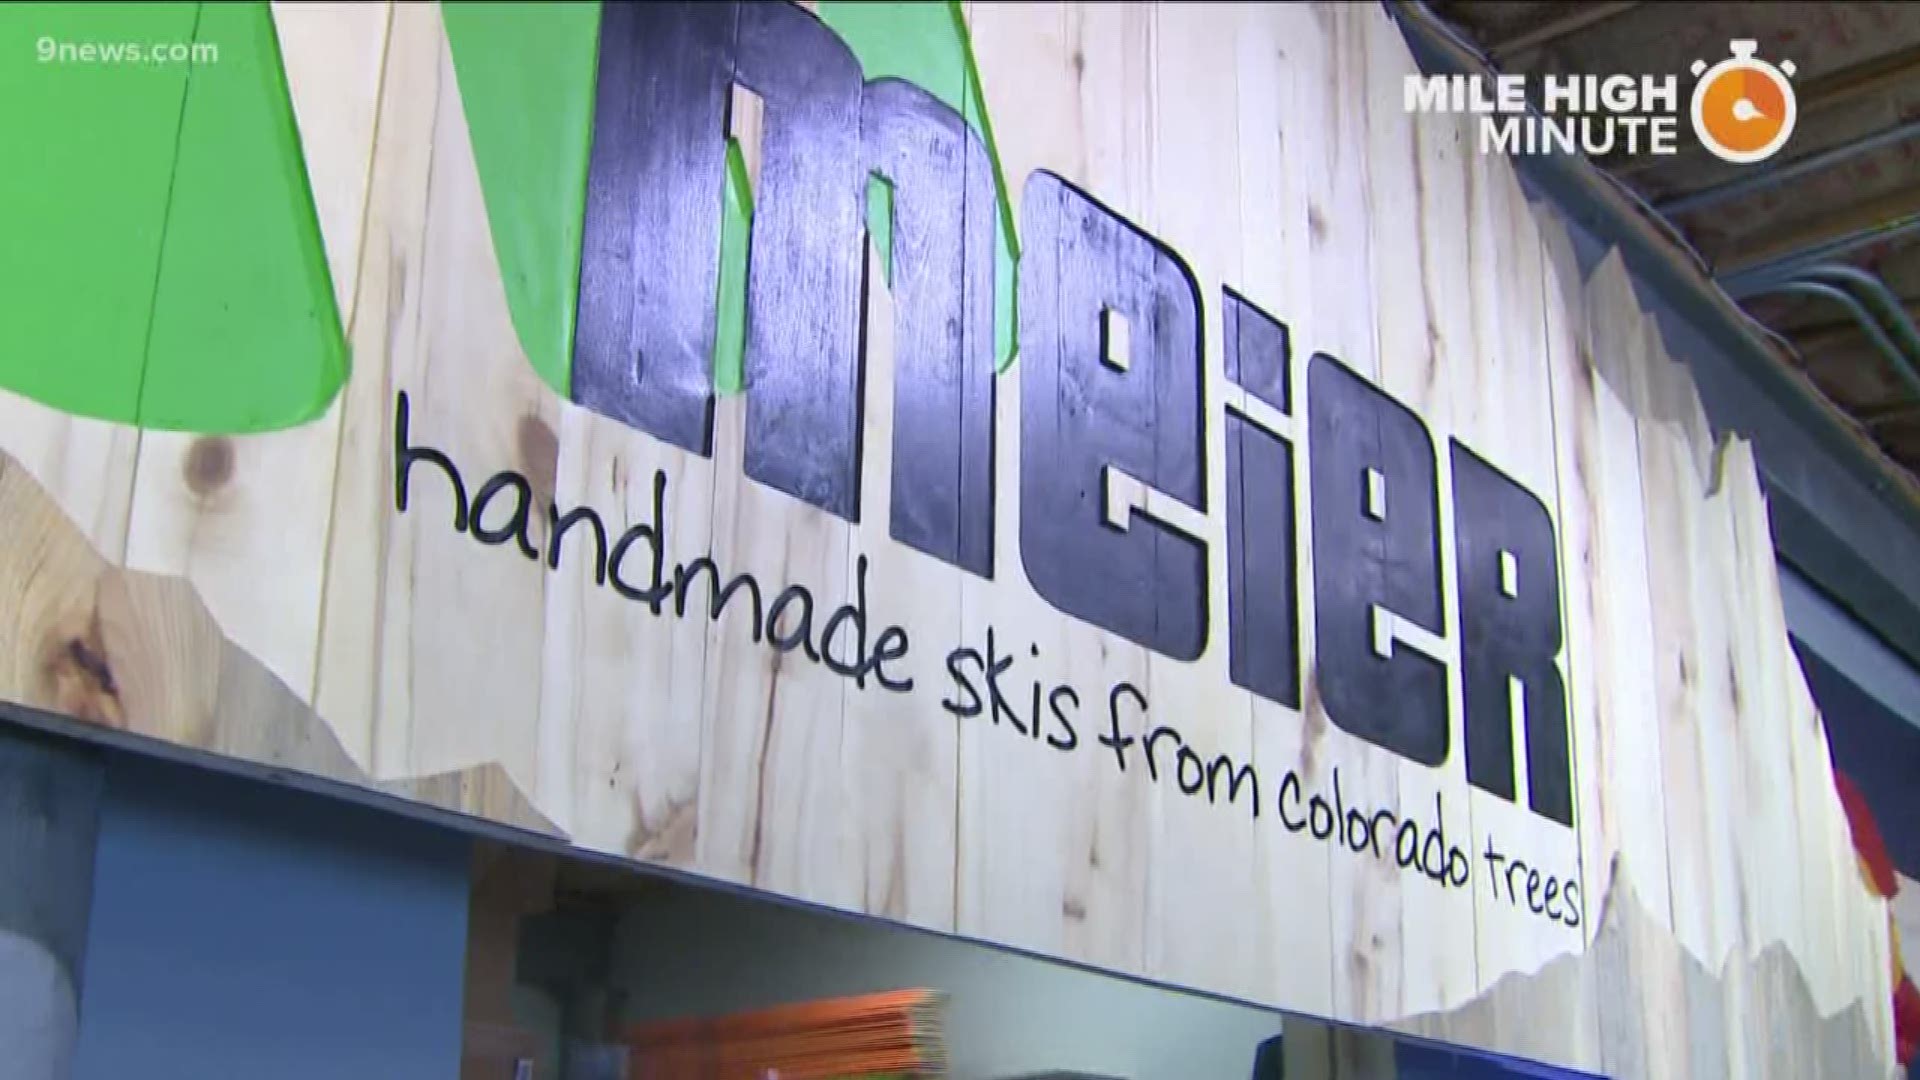 Visit Meier Skis on South Broadway and grab a beer at the Craft Skiery bar where you can watch skis be pressed through large glass windows.